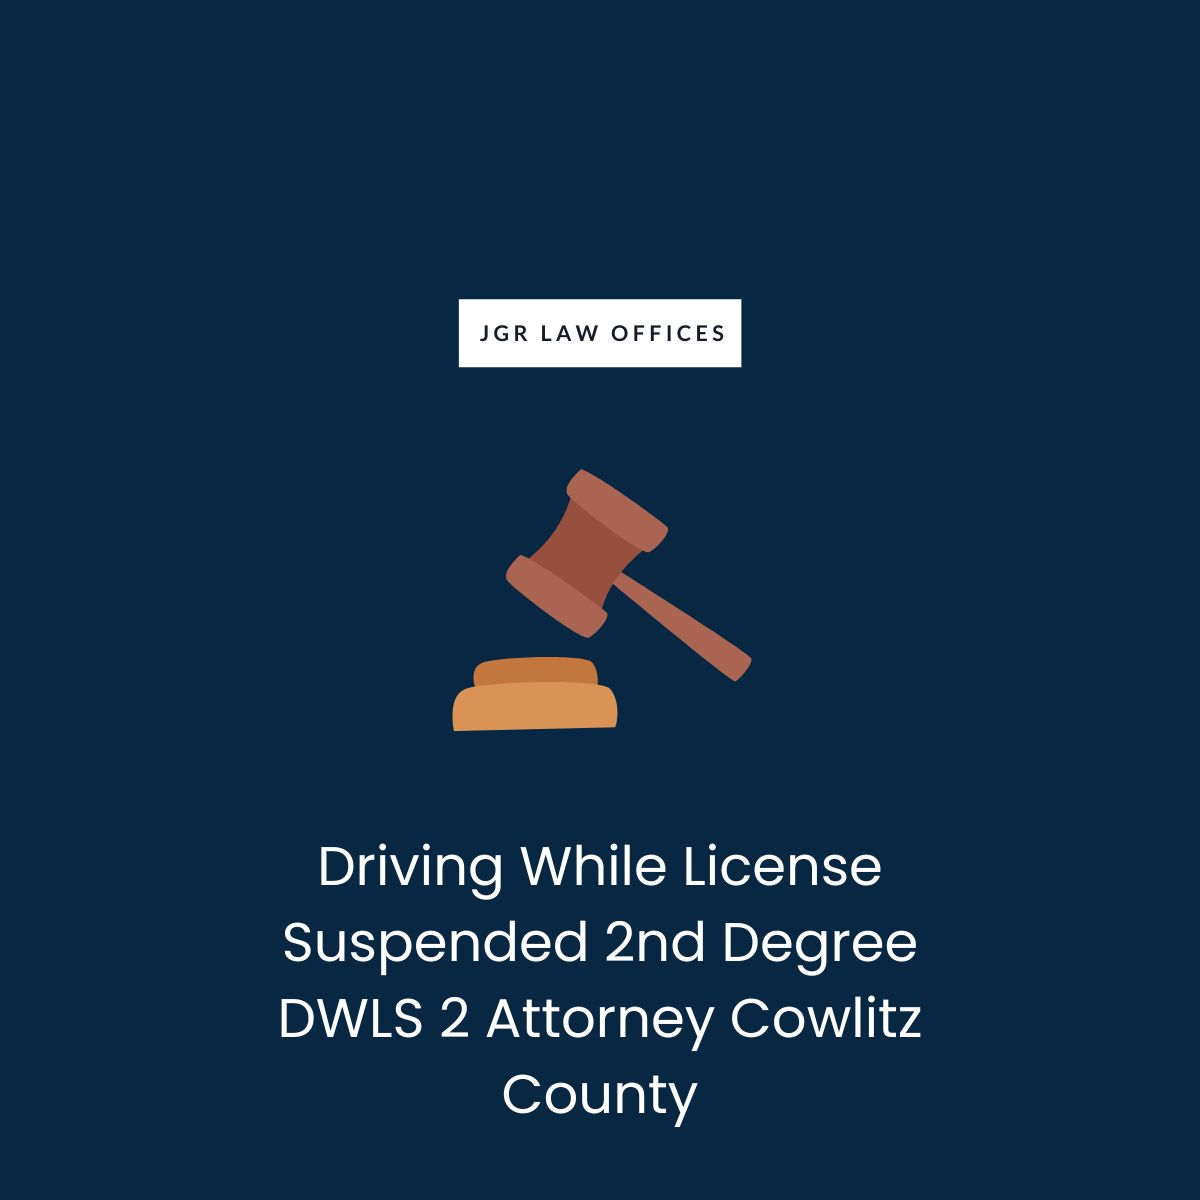 Driving While License Suspended 2nd Degree DWLS 2 Attorney Cowlitz County